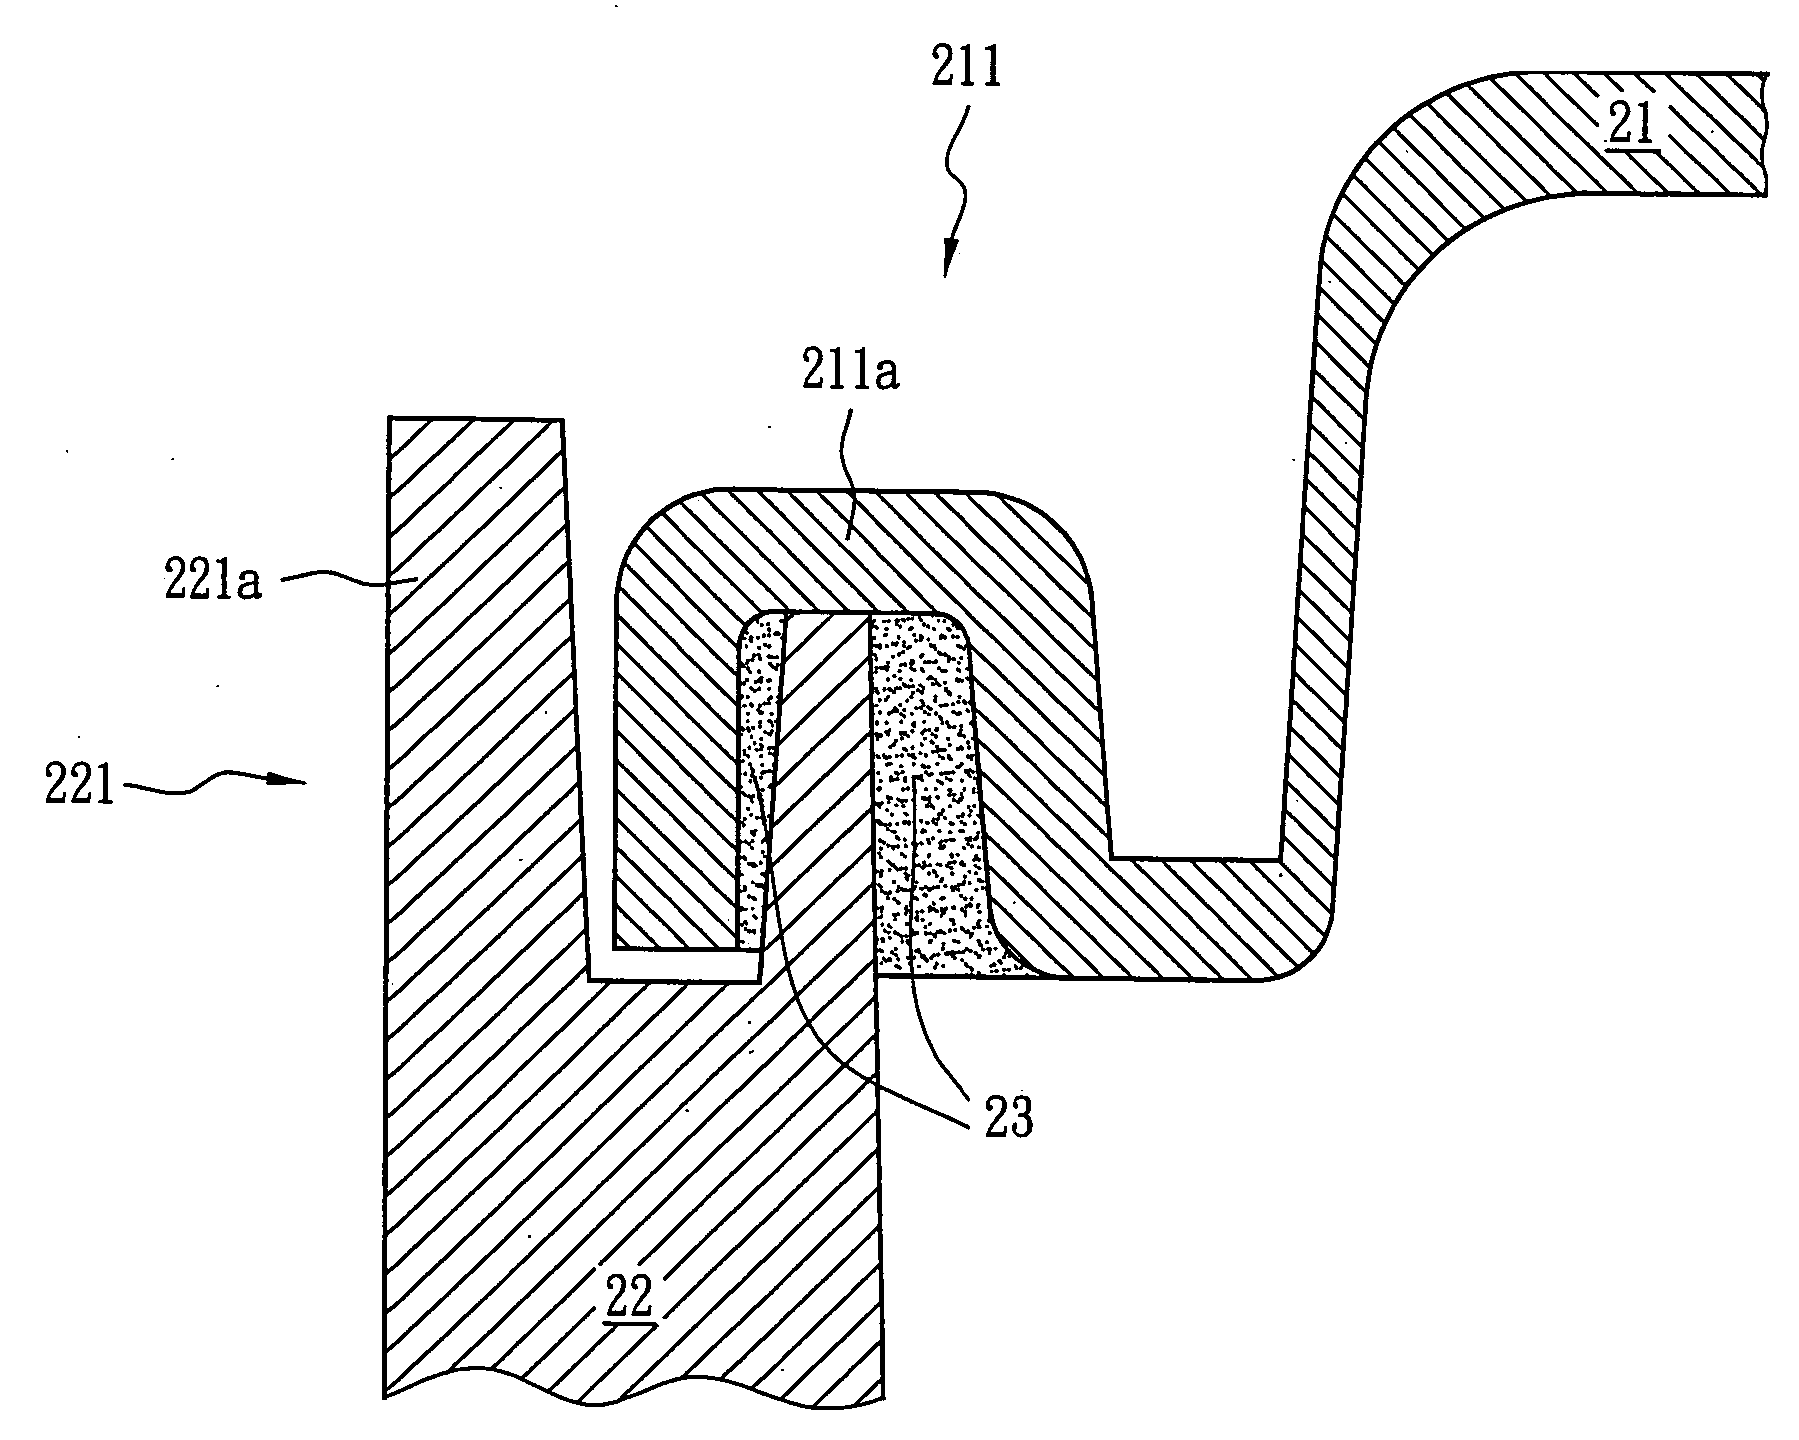 Electromagnetic interference shielding apparatus for signal transceiver